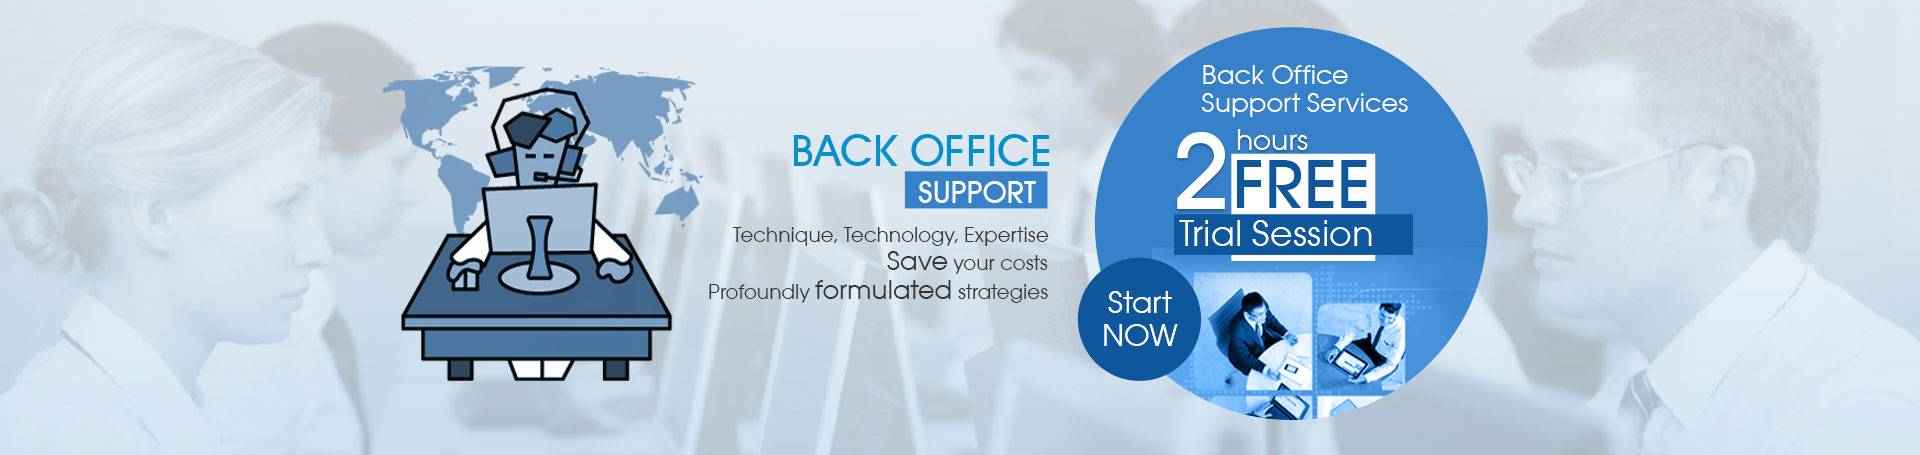 back office support